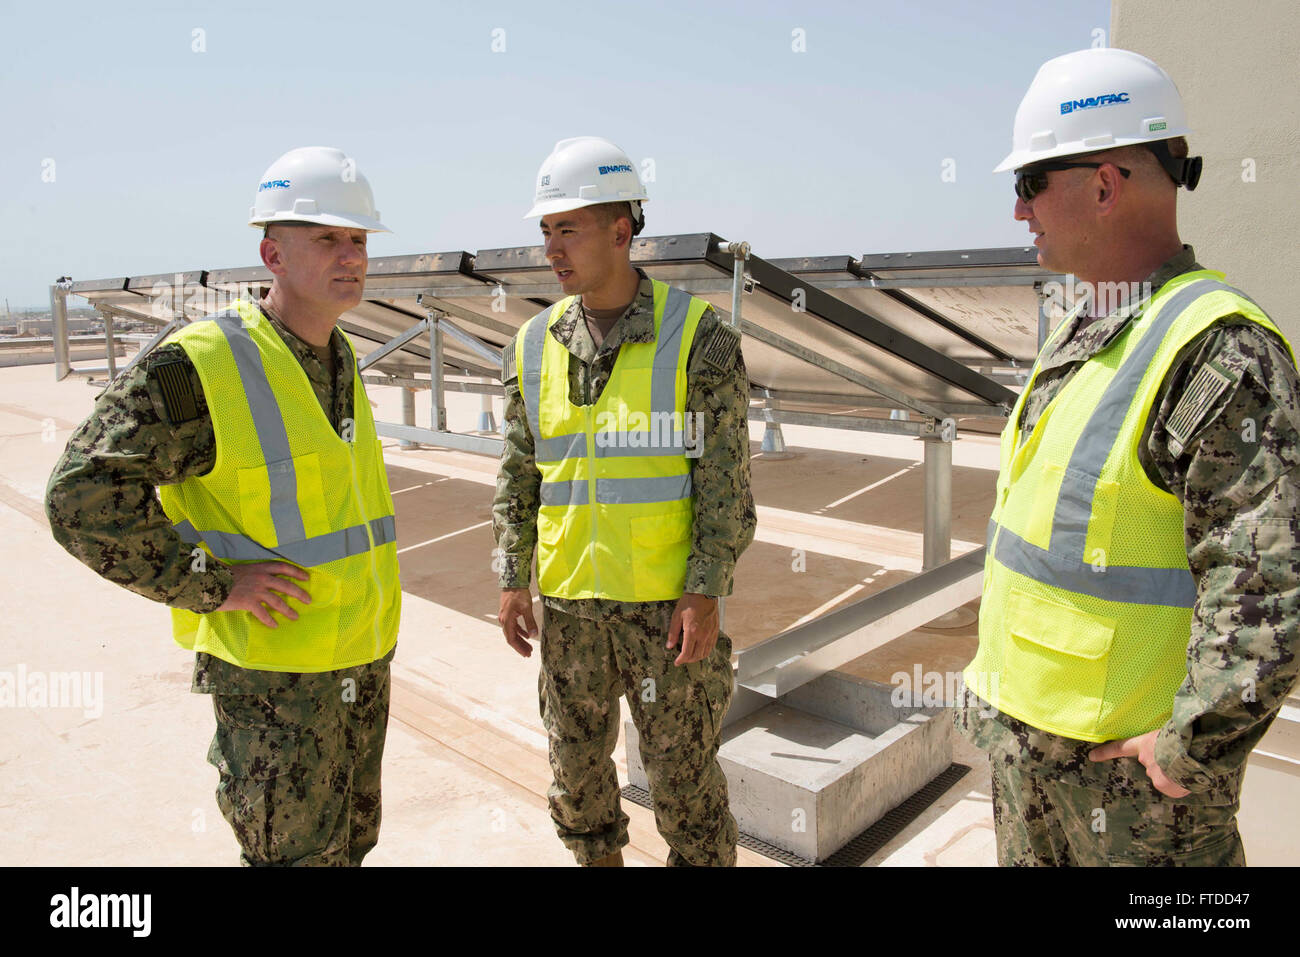 150603-N-OX801-138 CAMP LEMONNIER, Djibouti (June 3, 2015) Naval Forces Europe-Africa Fleet Master Chief Steven Giordano, left, tours solar water heating systems on a Camp Lemonnier  barracks under construction with Lt. Michael Yoshihara, second from left, and Senior Chief Construction Mechanic Jamie Warwick during a visit to Camp Lemonnier, Djibouti, Africa, June 3, 2015. Giordano's visit to Camp Lemonnier and Combined Joint Task Force-Horn of Africa locations served to better understand the commands' quality of work and quality of life, as well as recognizing exemplary Sailors within each co Stock Photo